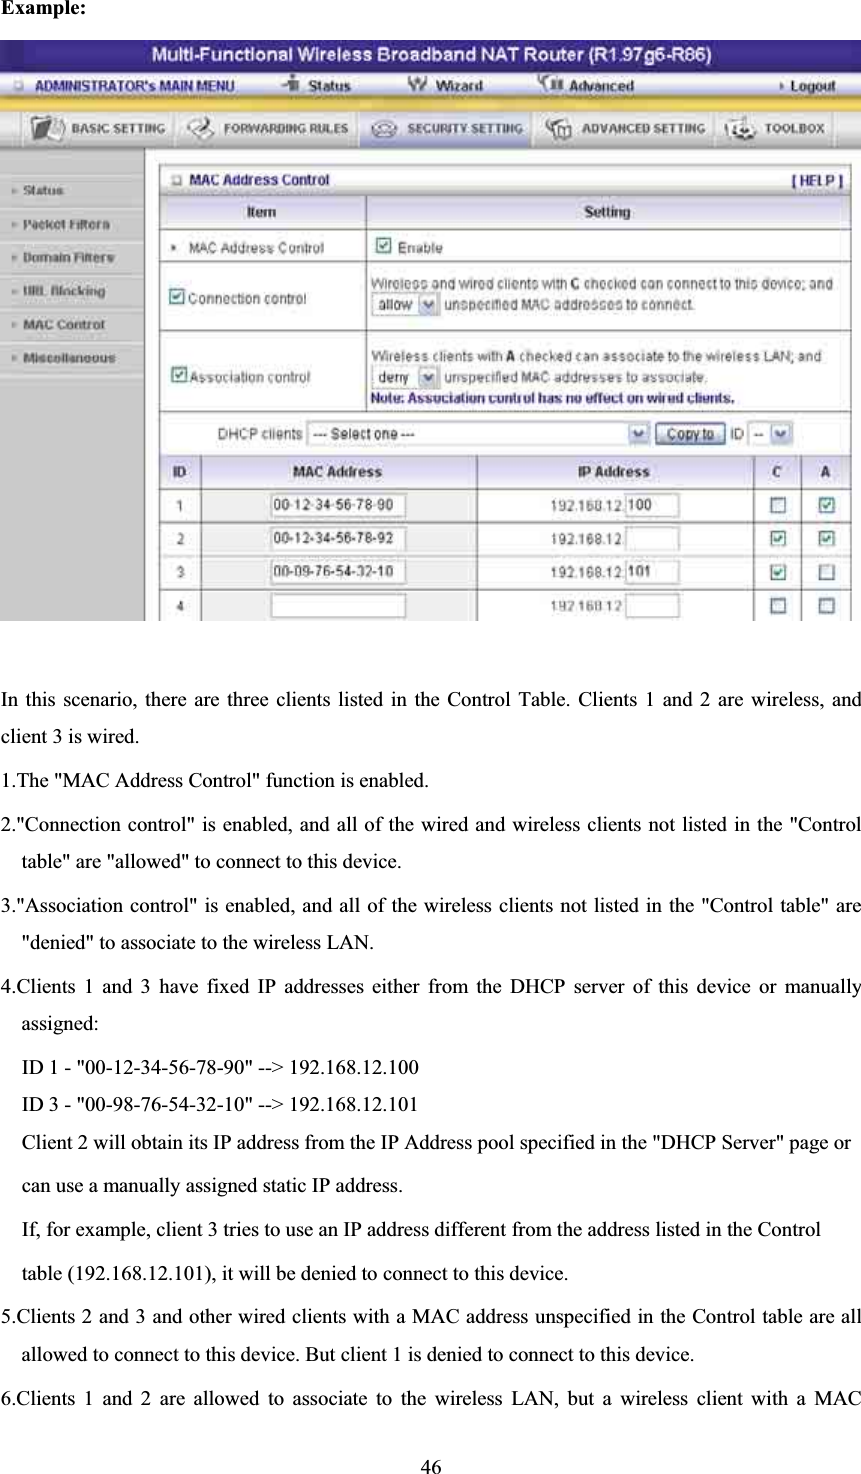 Example: In this scenario, there are three clients listed in the Control Table. Clients 1 and 2 are wireless, and client 3 is wired.   1.The &quot;MAC Address Control&quot; function is enabled.   2.&quot;Connection control&quot; is enabled, and all of the wired and wireless clients not listed in the &quot;Control table&quot; are &quot;allowed&quot; to connect to this device.   3.&quot;Association control&quot; is enabled, and all of the wireless clients not listed in the &quot;Control table&quot; are &quot;denied&quot; to associate to the wireless LAN.   4.Clients 1 and 3 have fixed IP addresses either from the DHCP server of this device or manually assigned: ID 1 - &quot;00-12-34-56-78-90&quot; --&gt; 192.168.12.100 ID 3 - &quot;00-98-76-54-32-10&quot; --&gt; 192.168.12.101 Client 2 will obtain its IP address from the IP Address pool specified in the &quot;DHCP Server&quot; page or   can use a manually assigned static IP address. If, for example, client 3 tries to use an IP address different from the address listed in the Control   table (192.168.12.101), it will be denied to connect to this device.   5.Clients 2 and 3 and other wired clients with a MAC address unspecified in the Control table are all allowed to connect to this device. But client 1 is denied to connect to this device.   6.Clients 1 and 2 are allowed to associate to the wireless LAN, but a wireless client with a MAC 46